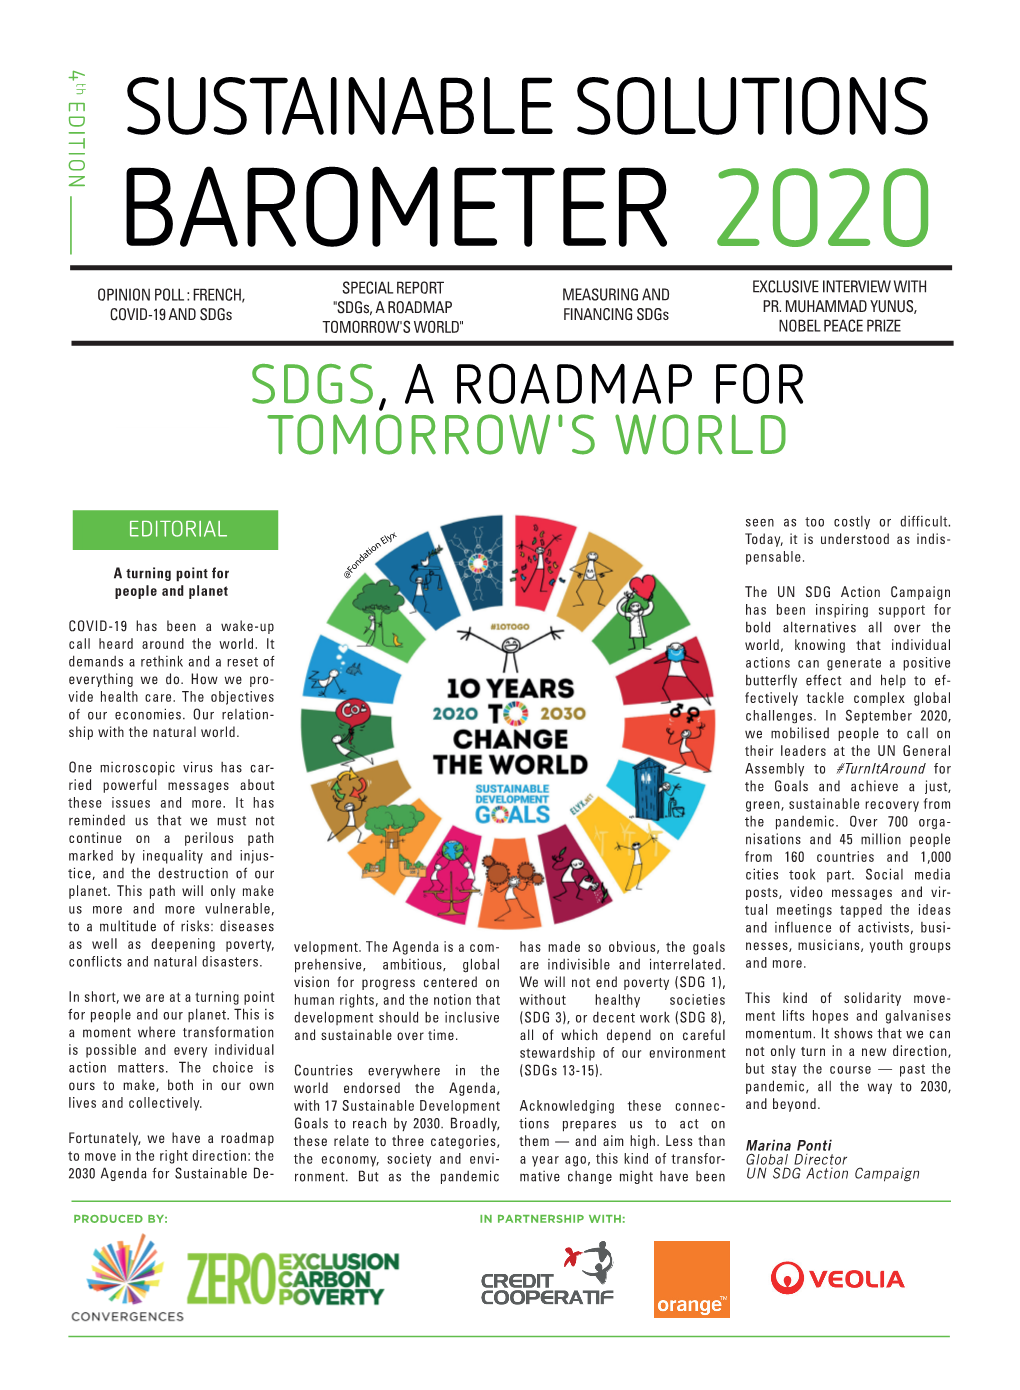 Sustainable Solutions Barometer Sdgs in the Light of the Health Crisis: a New